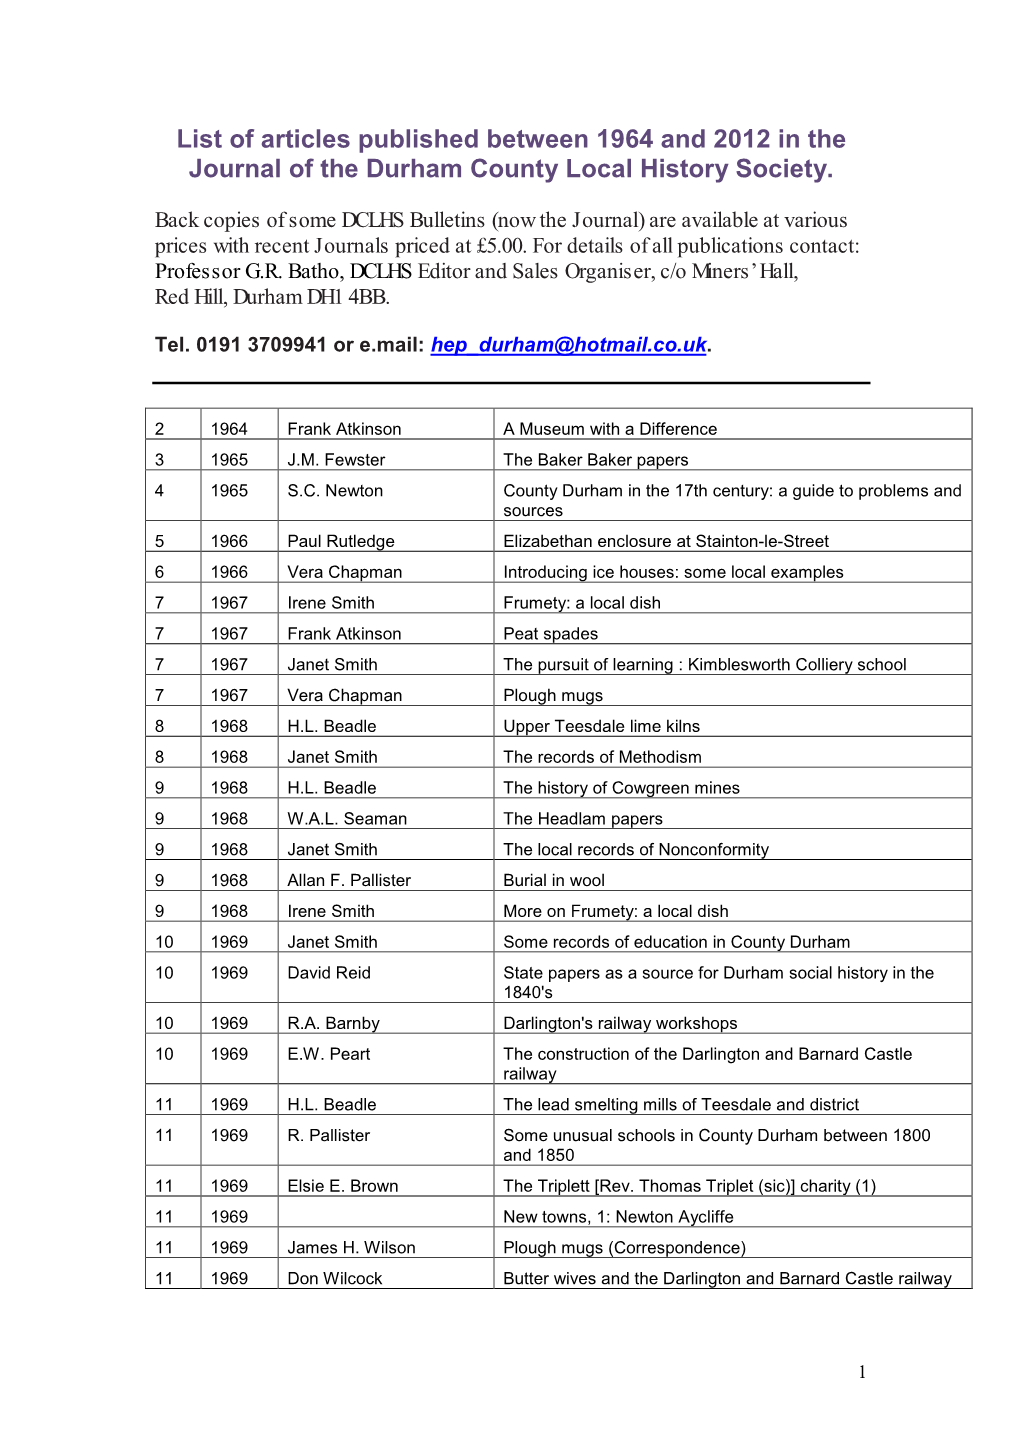 List of Articles Published Between 1964 and 2012 in the Journal of the Durham County Local History Society